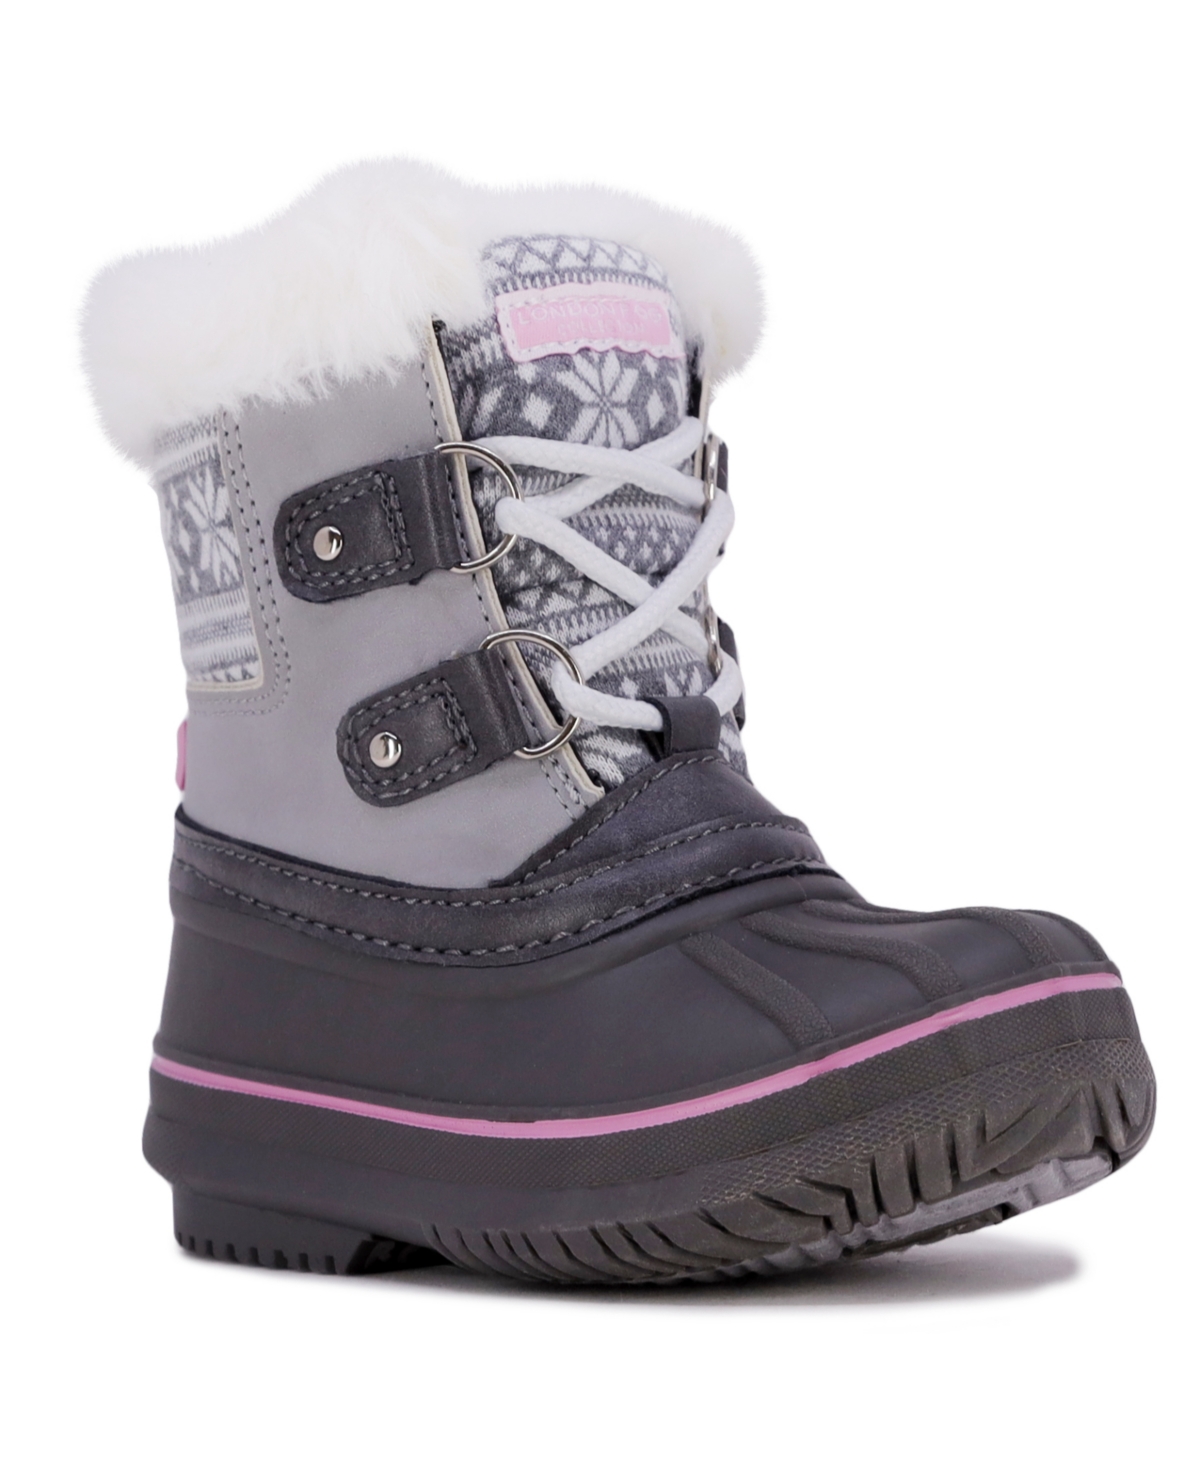 London Fog Babies' Toddler Girls Tiana Cold Weather Lace Up Boots In Light Gray,light Pink